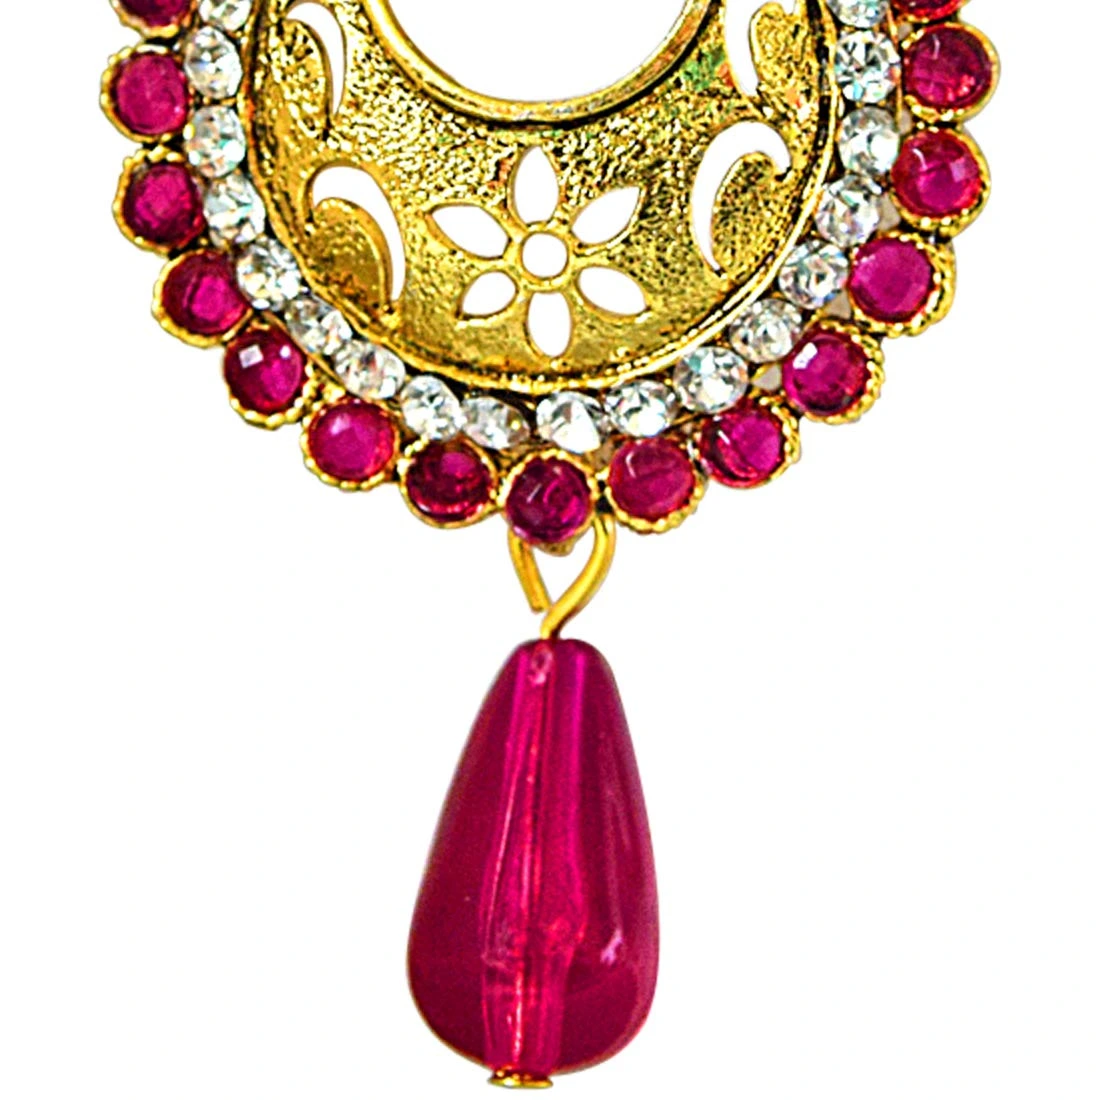 Traditional Pink & White Stones & Gold Plated Ch bali Earrings